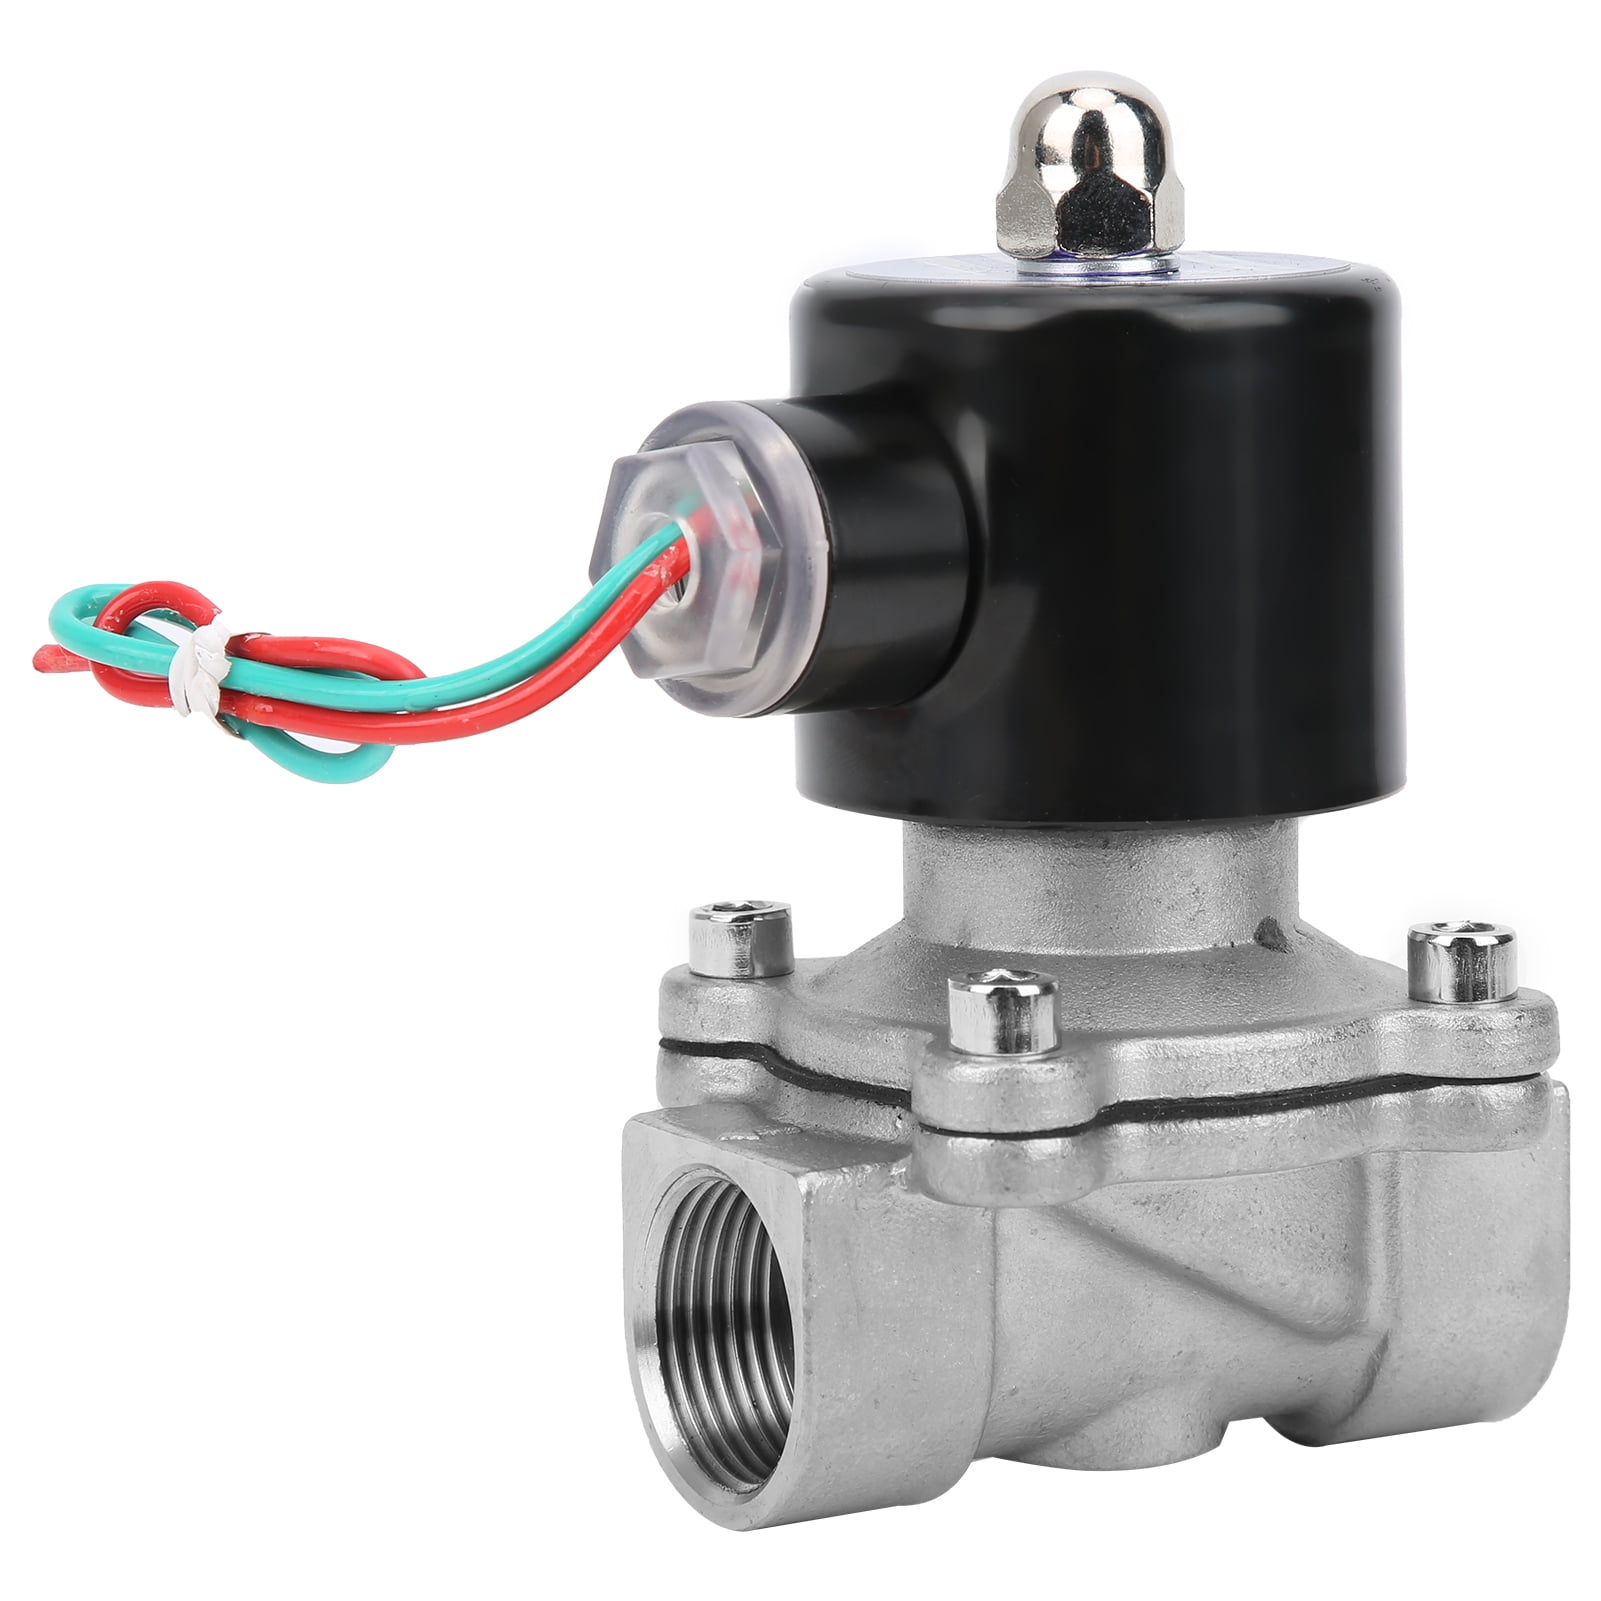 Solenoid Valve Durable Convenient Industrial Hardware Supplies Stainless Steel Stable 1/2in Solenoid Valve Direct‑Acting Water Valve for Industrial AC380V